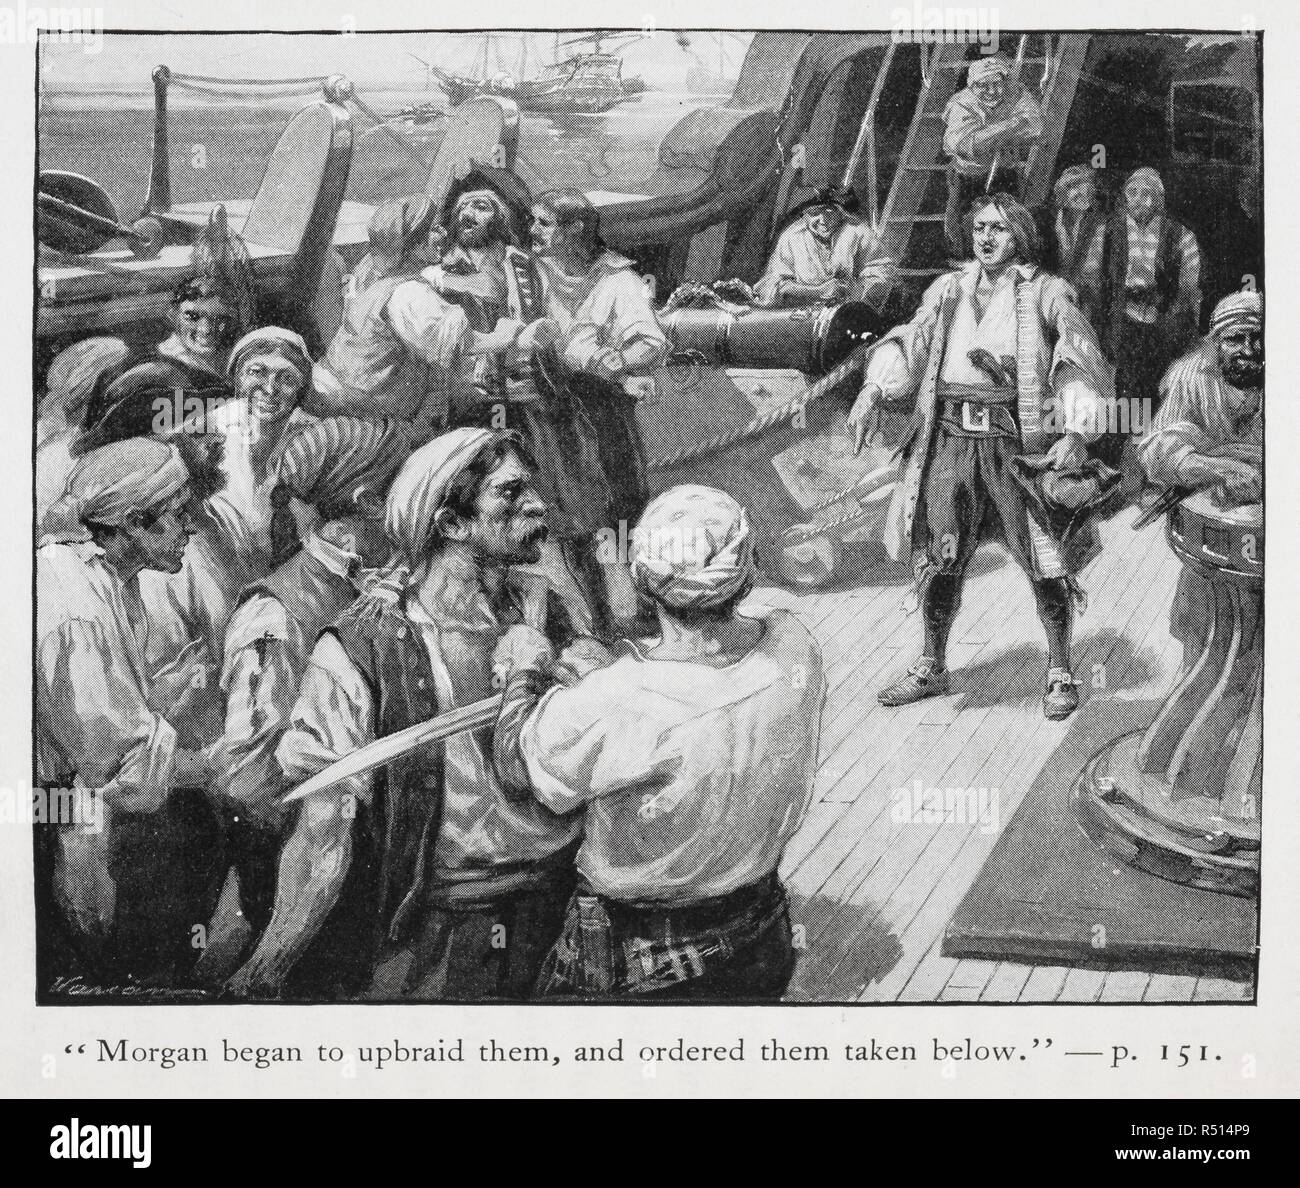 'Morgan began to upbraid them, and ordered them taken below'. Captain Henry Morgan, the pirate, addressing his crew. Buccaneers and Pirates of our Coasts ... New York, 1898. Source: 9770.aa.8, opposite page 151. Author: Stockton, Frank Richard. Varian, G. Stock Photo